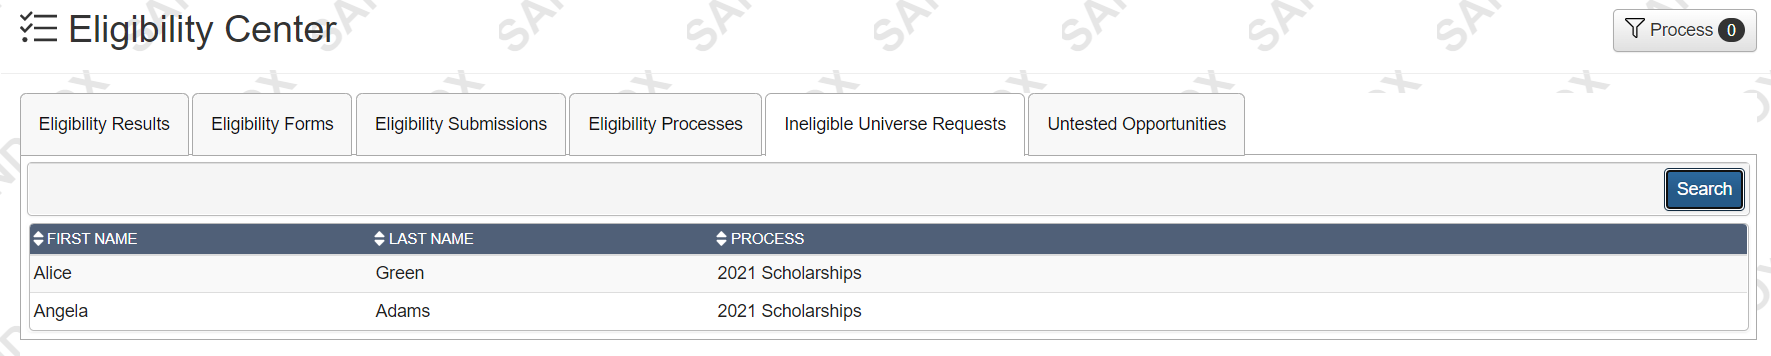 Ineligible Universe Requests tab